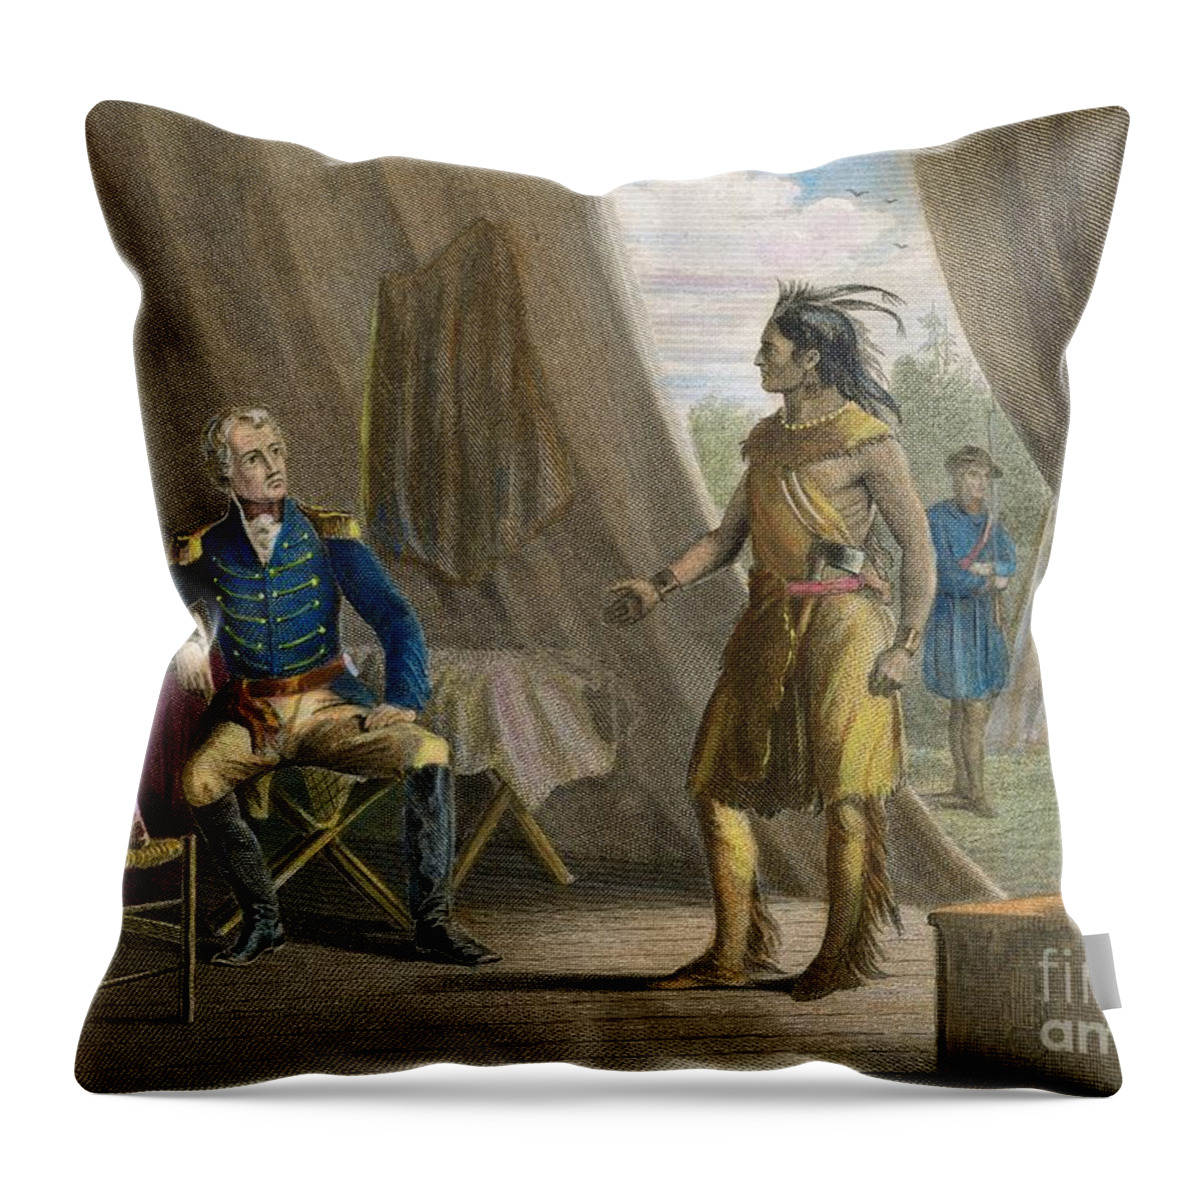 1814 Throw Pillow featuring the drawing Jackson And Weatherford by Granger